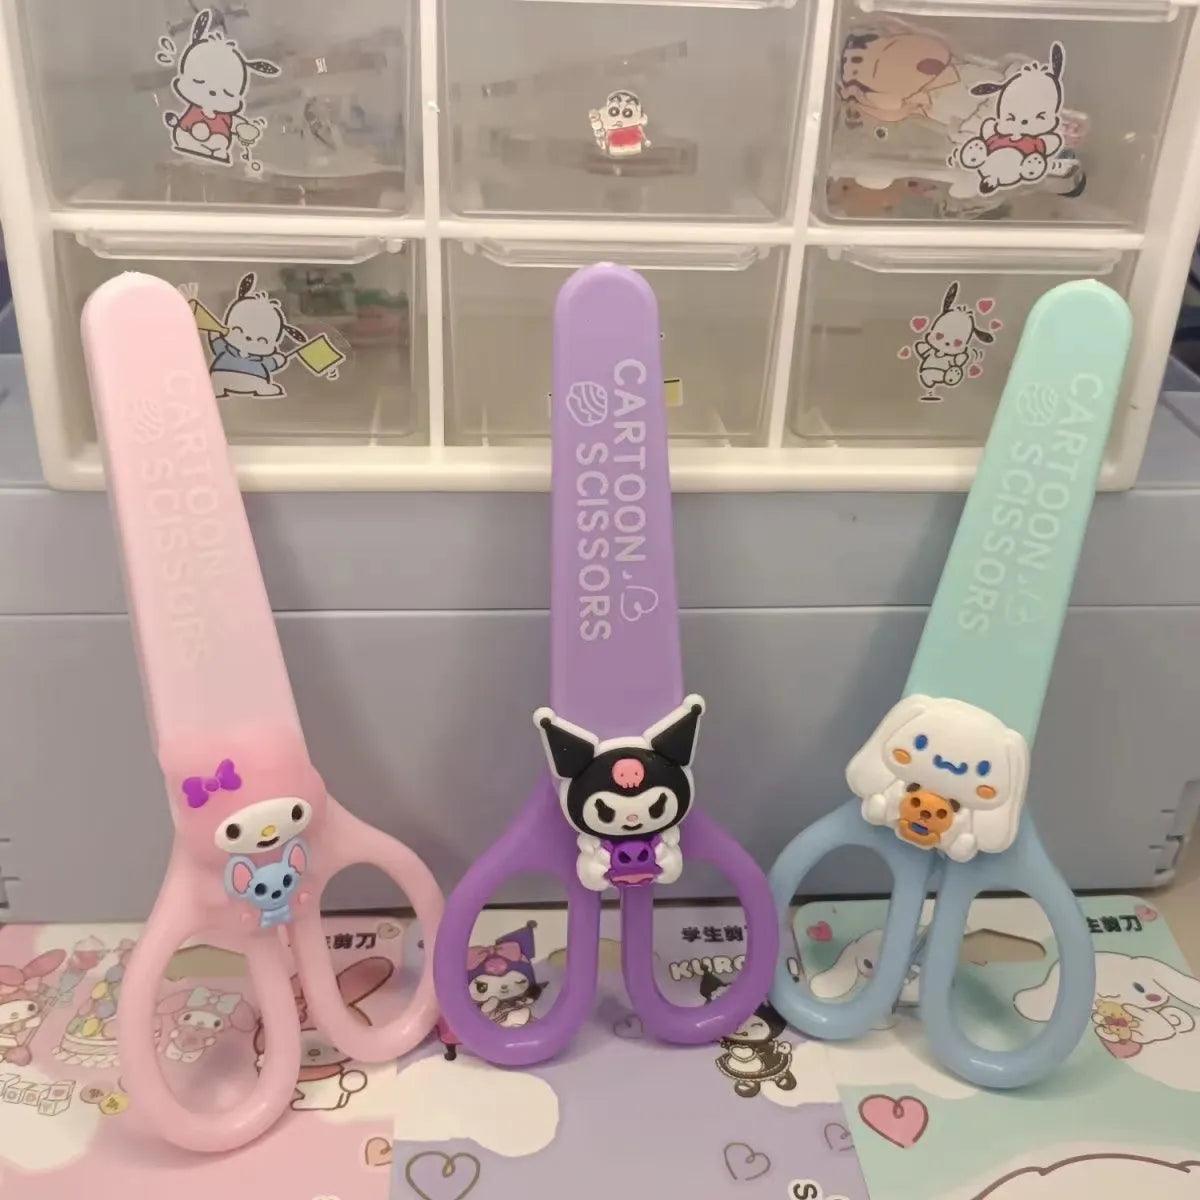 Kawaii Sanrio Characters Handcrafted Scissors - Cute Gift for Kids and Students  ourlum.com   